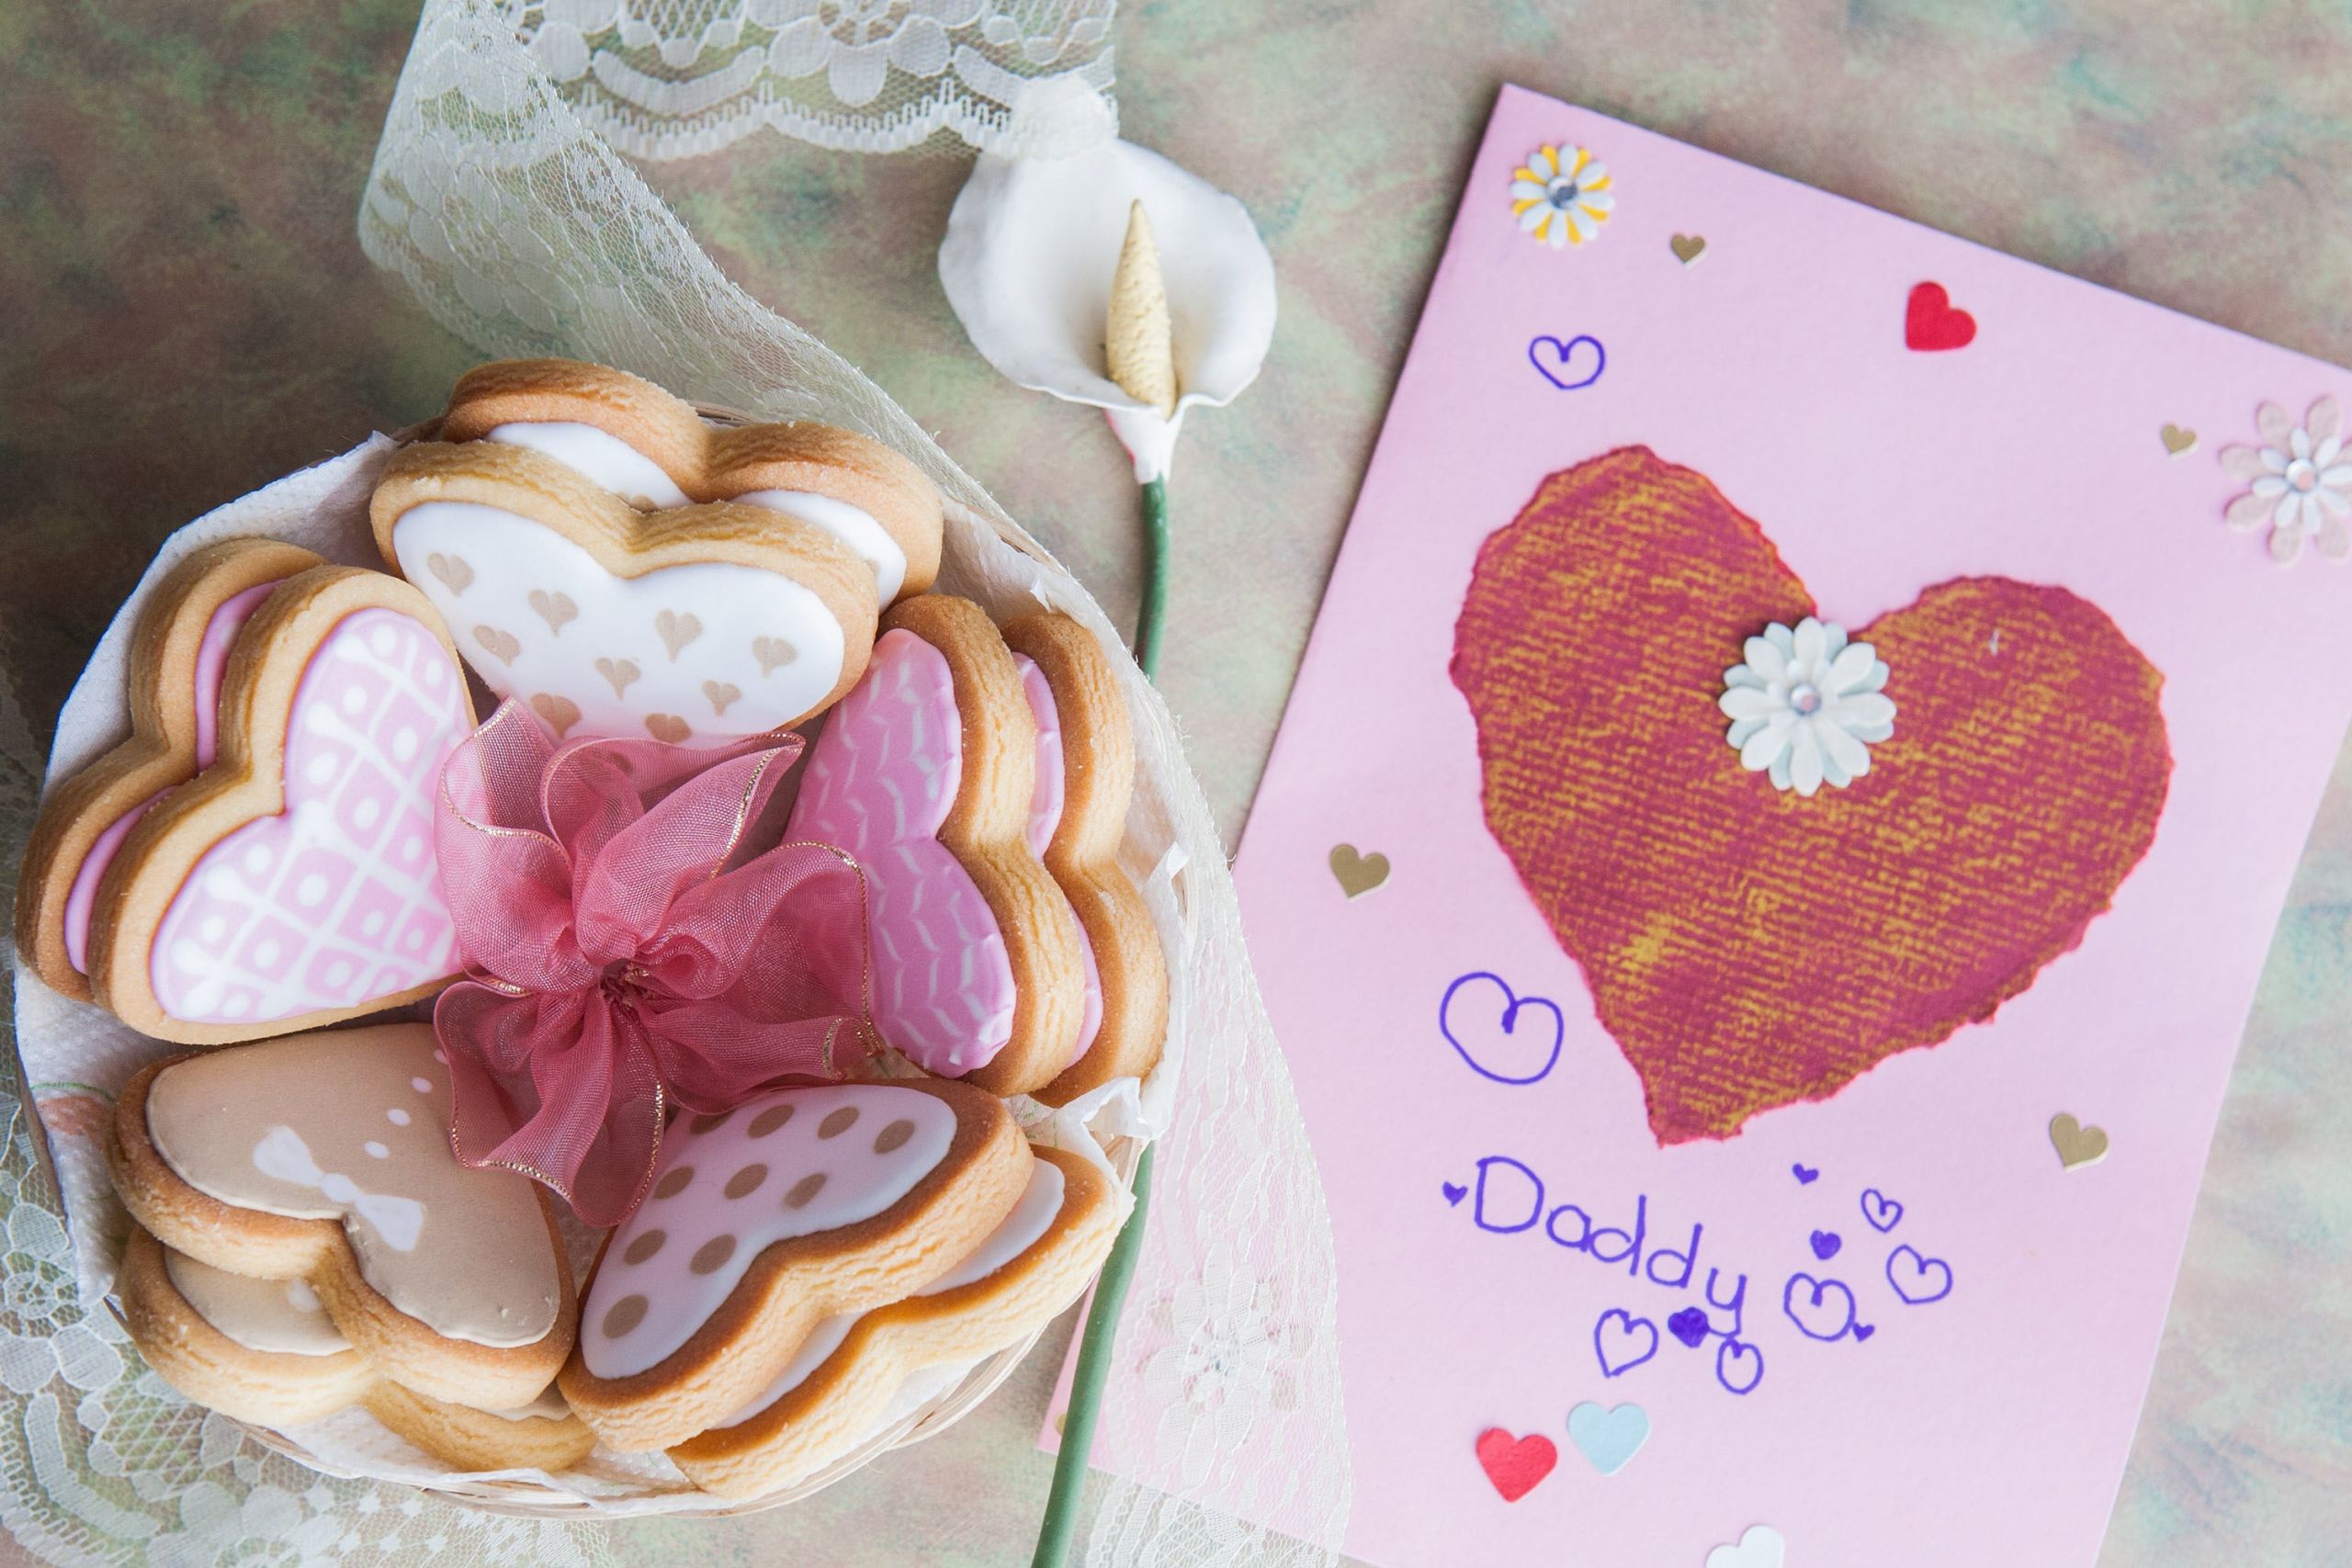 Father Daughter Valentine Gift Ideas
 Homemade Valentine s Day Gift Ideas for Dad From Young